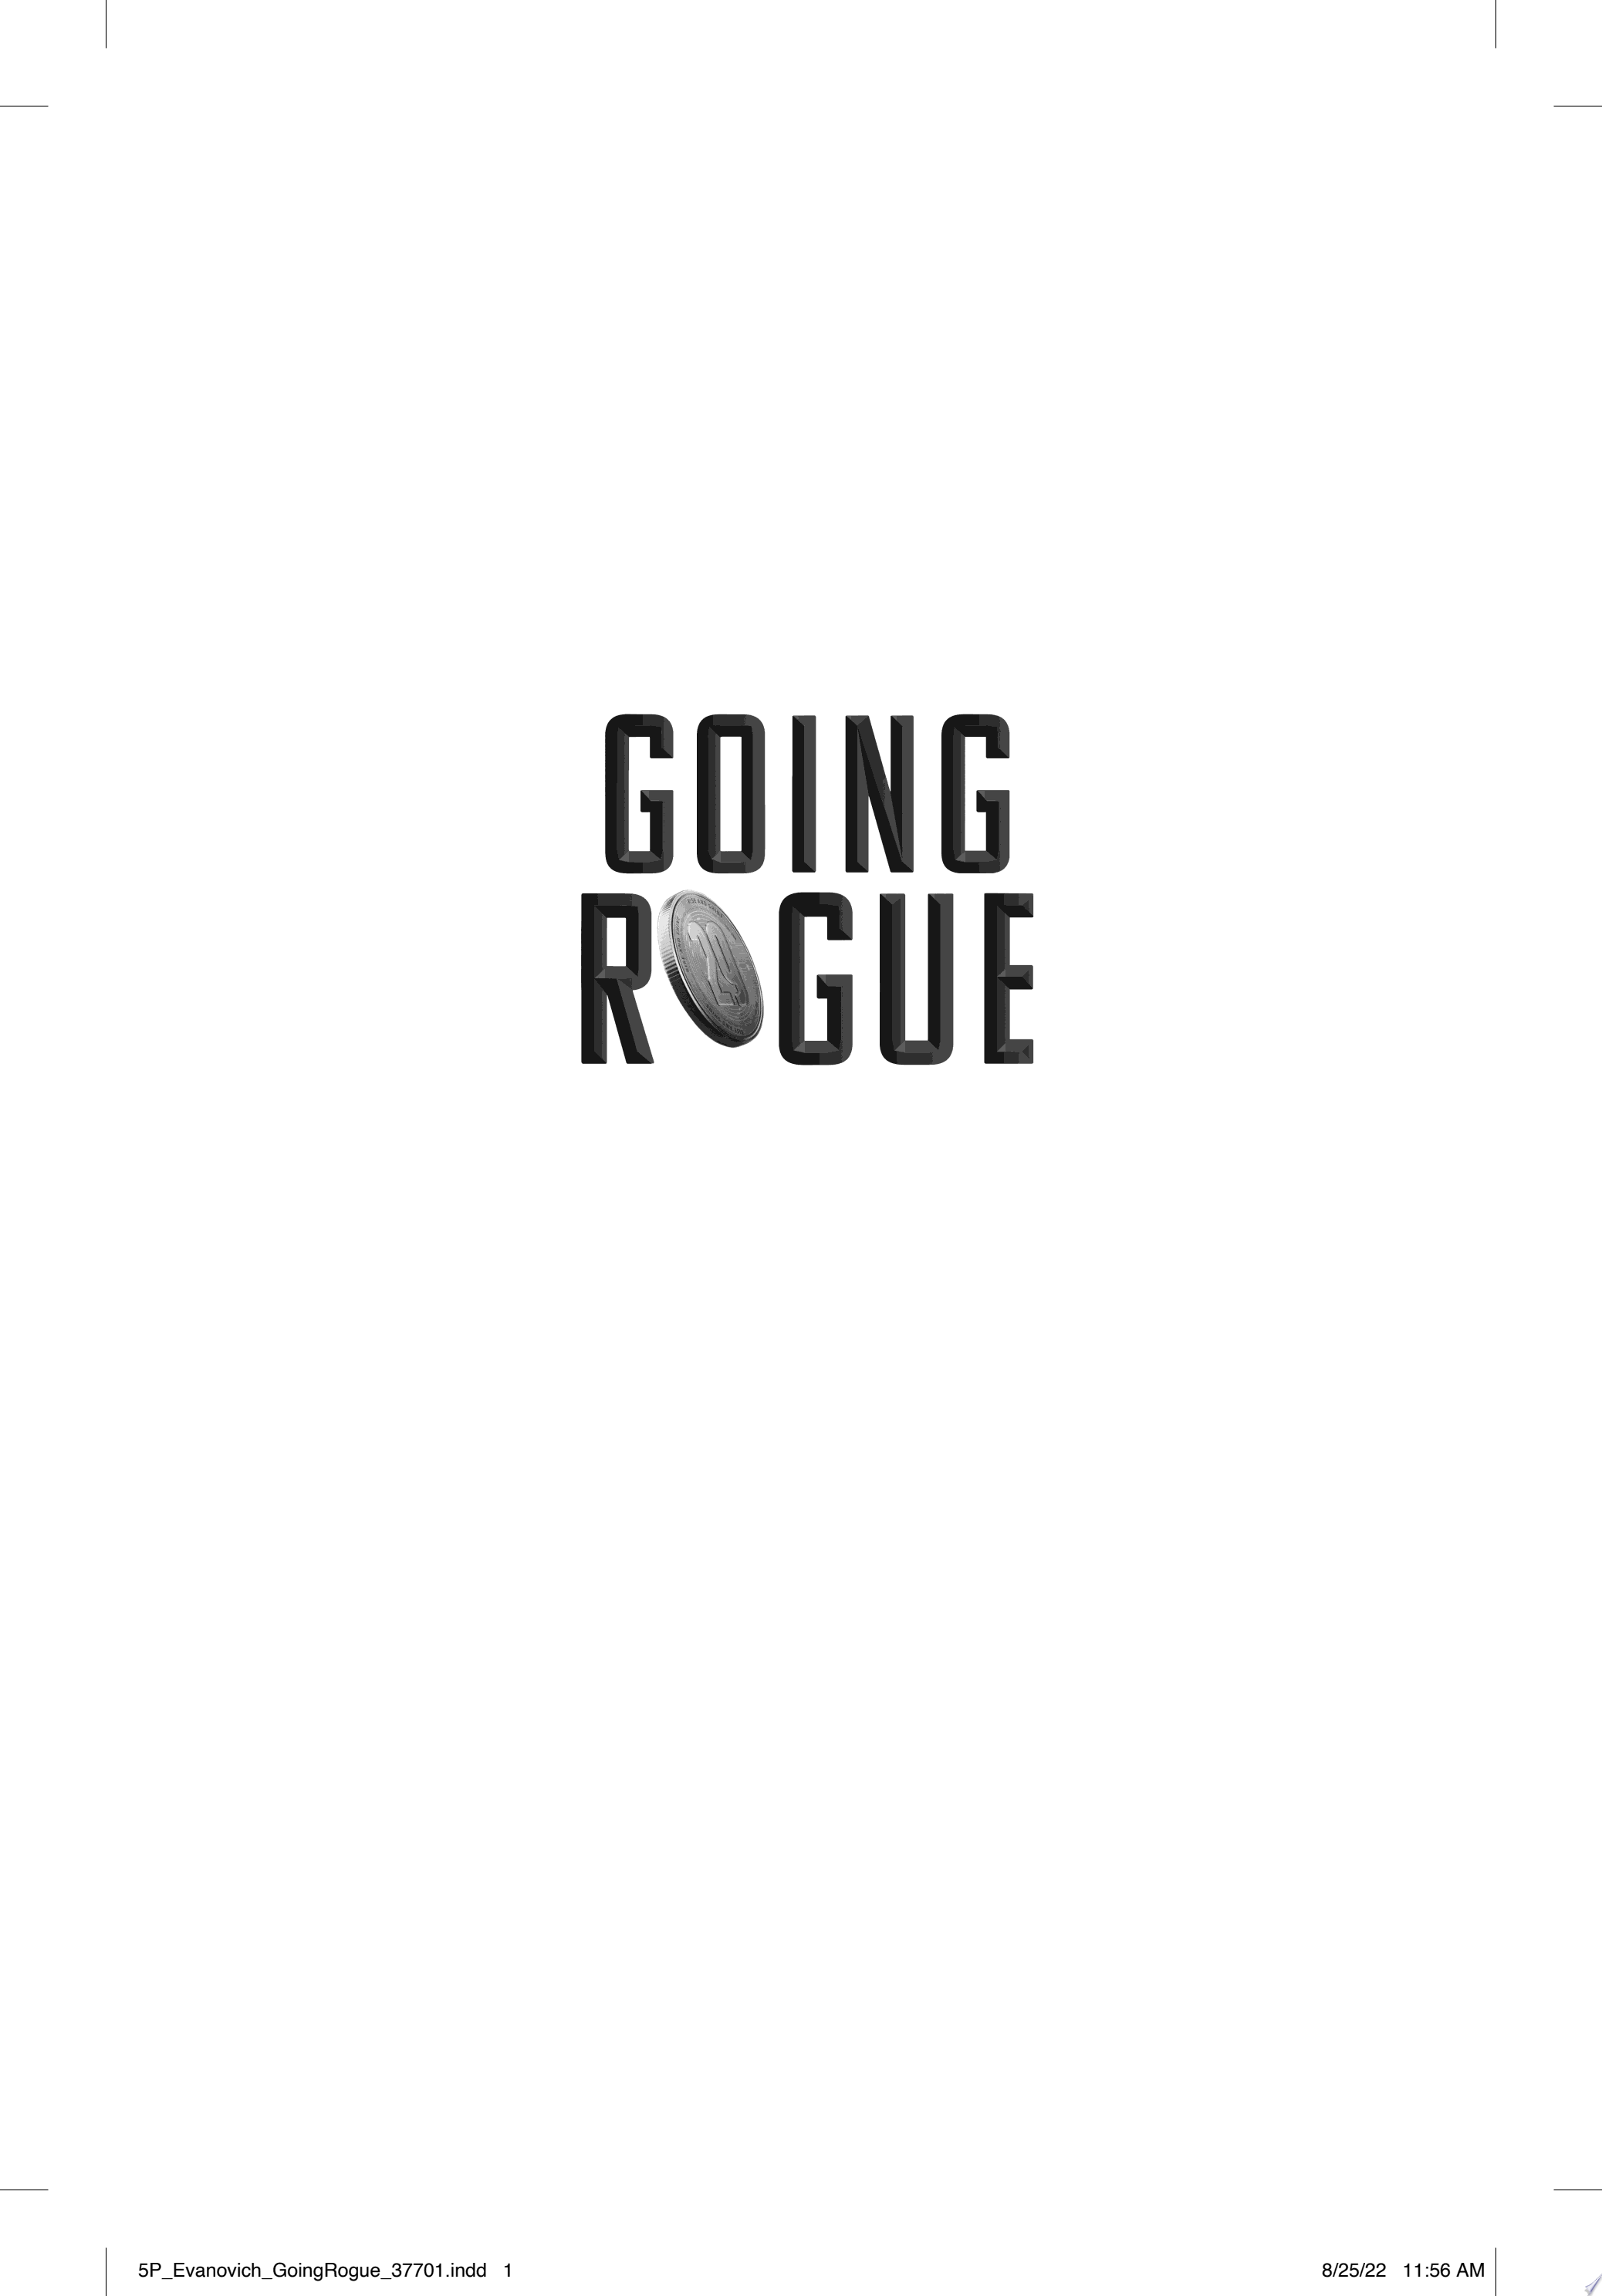 Image for "Going Rogue"